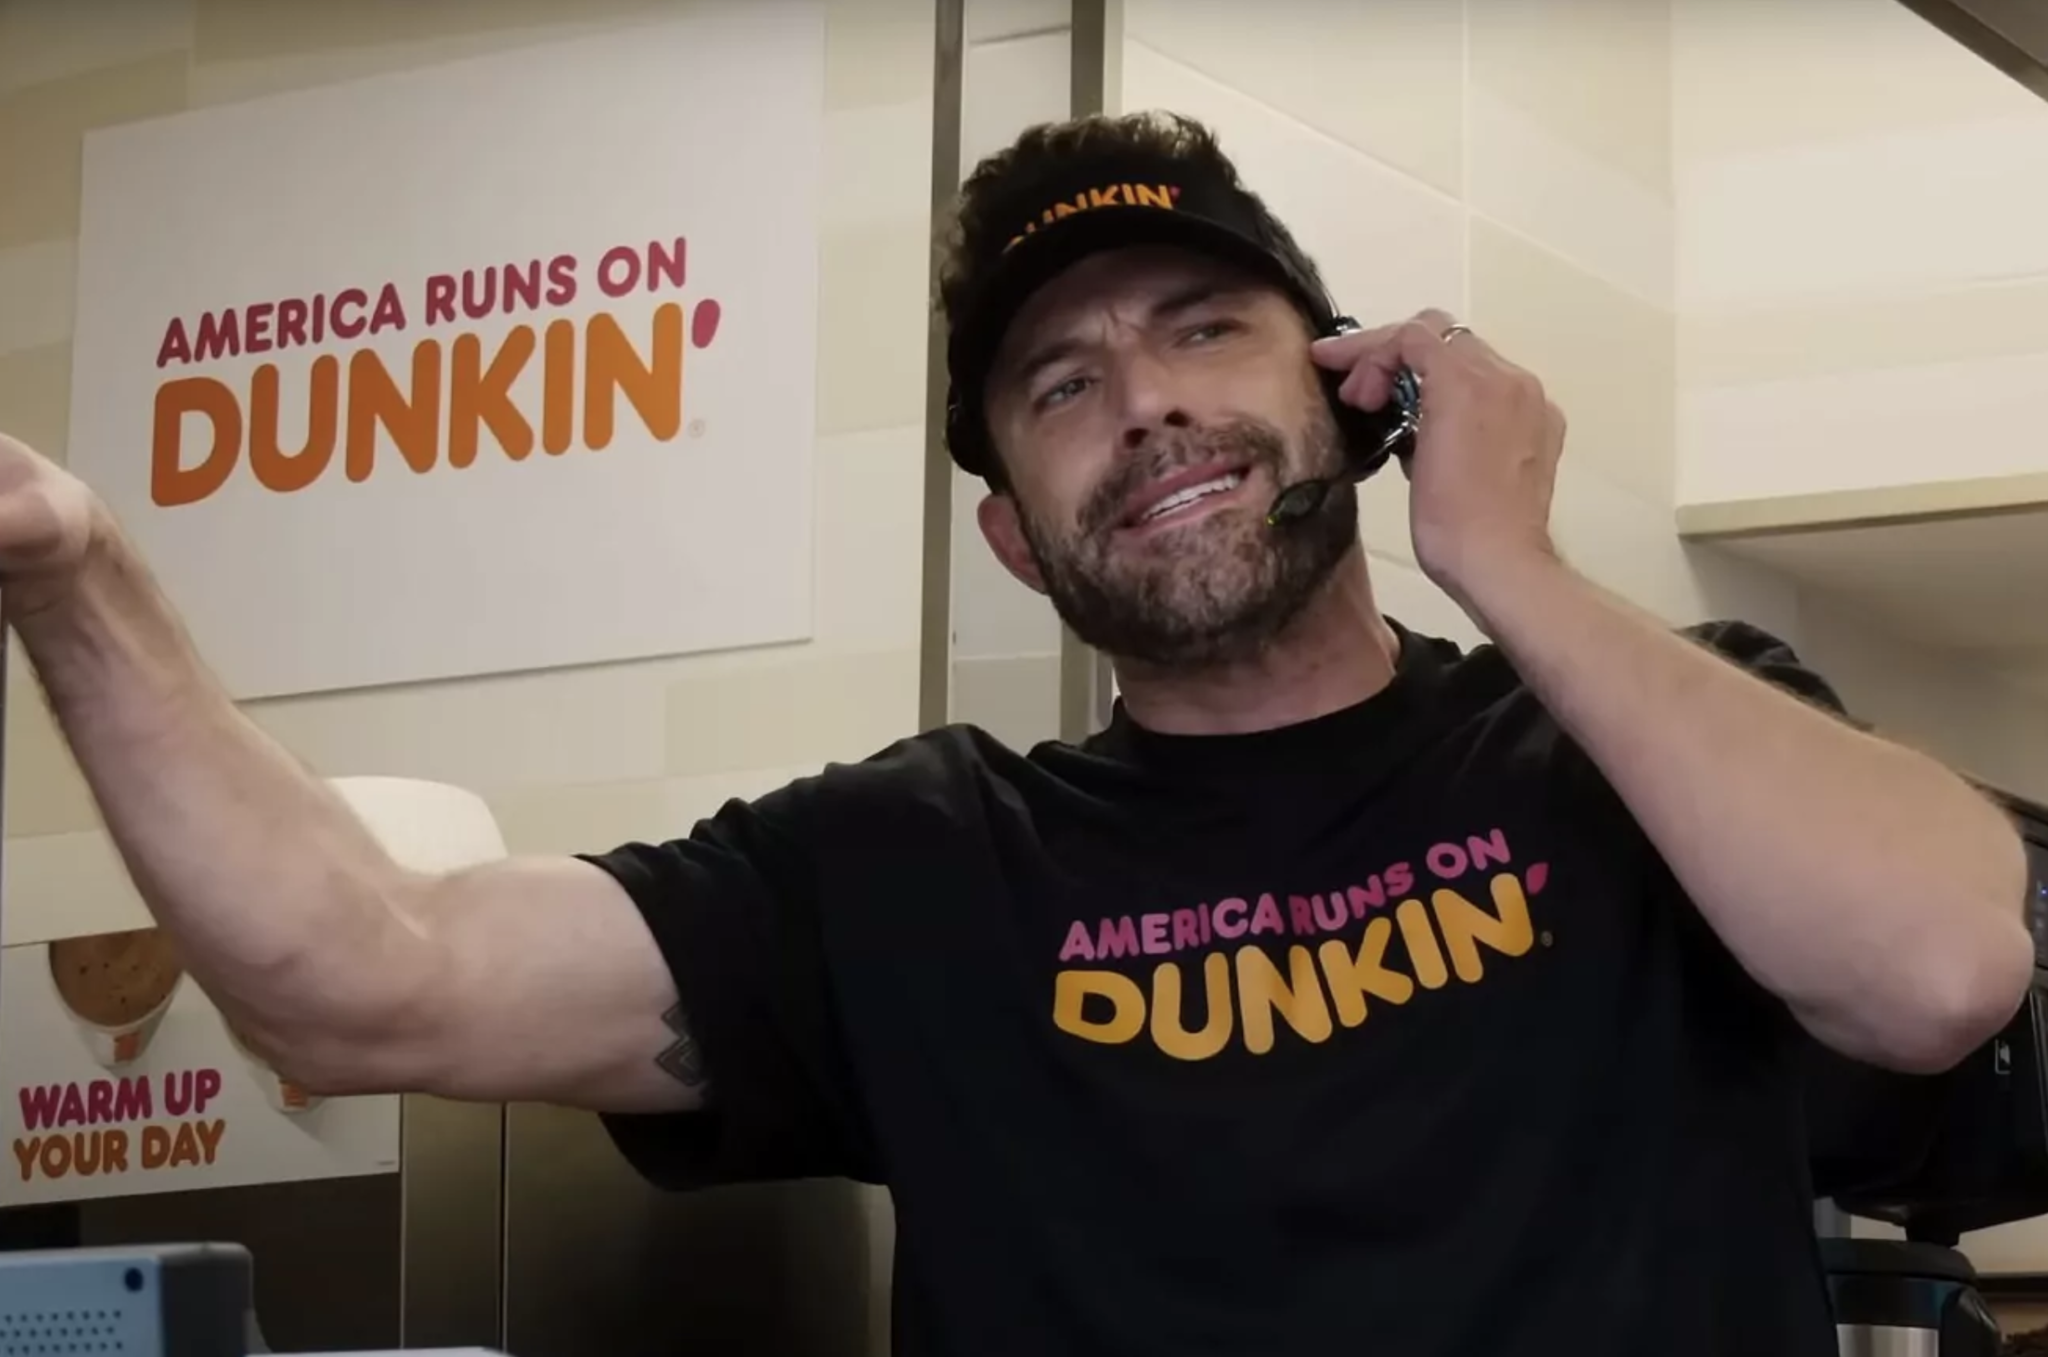 Ben Affleck swaps Jennifer Lopez for Ice Spice in latest Dunkin' Donuts commercial